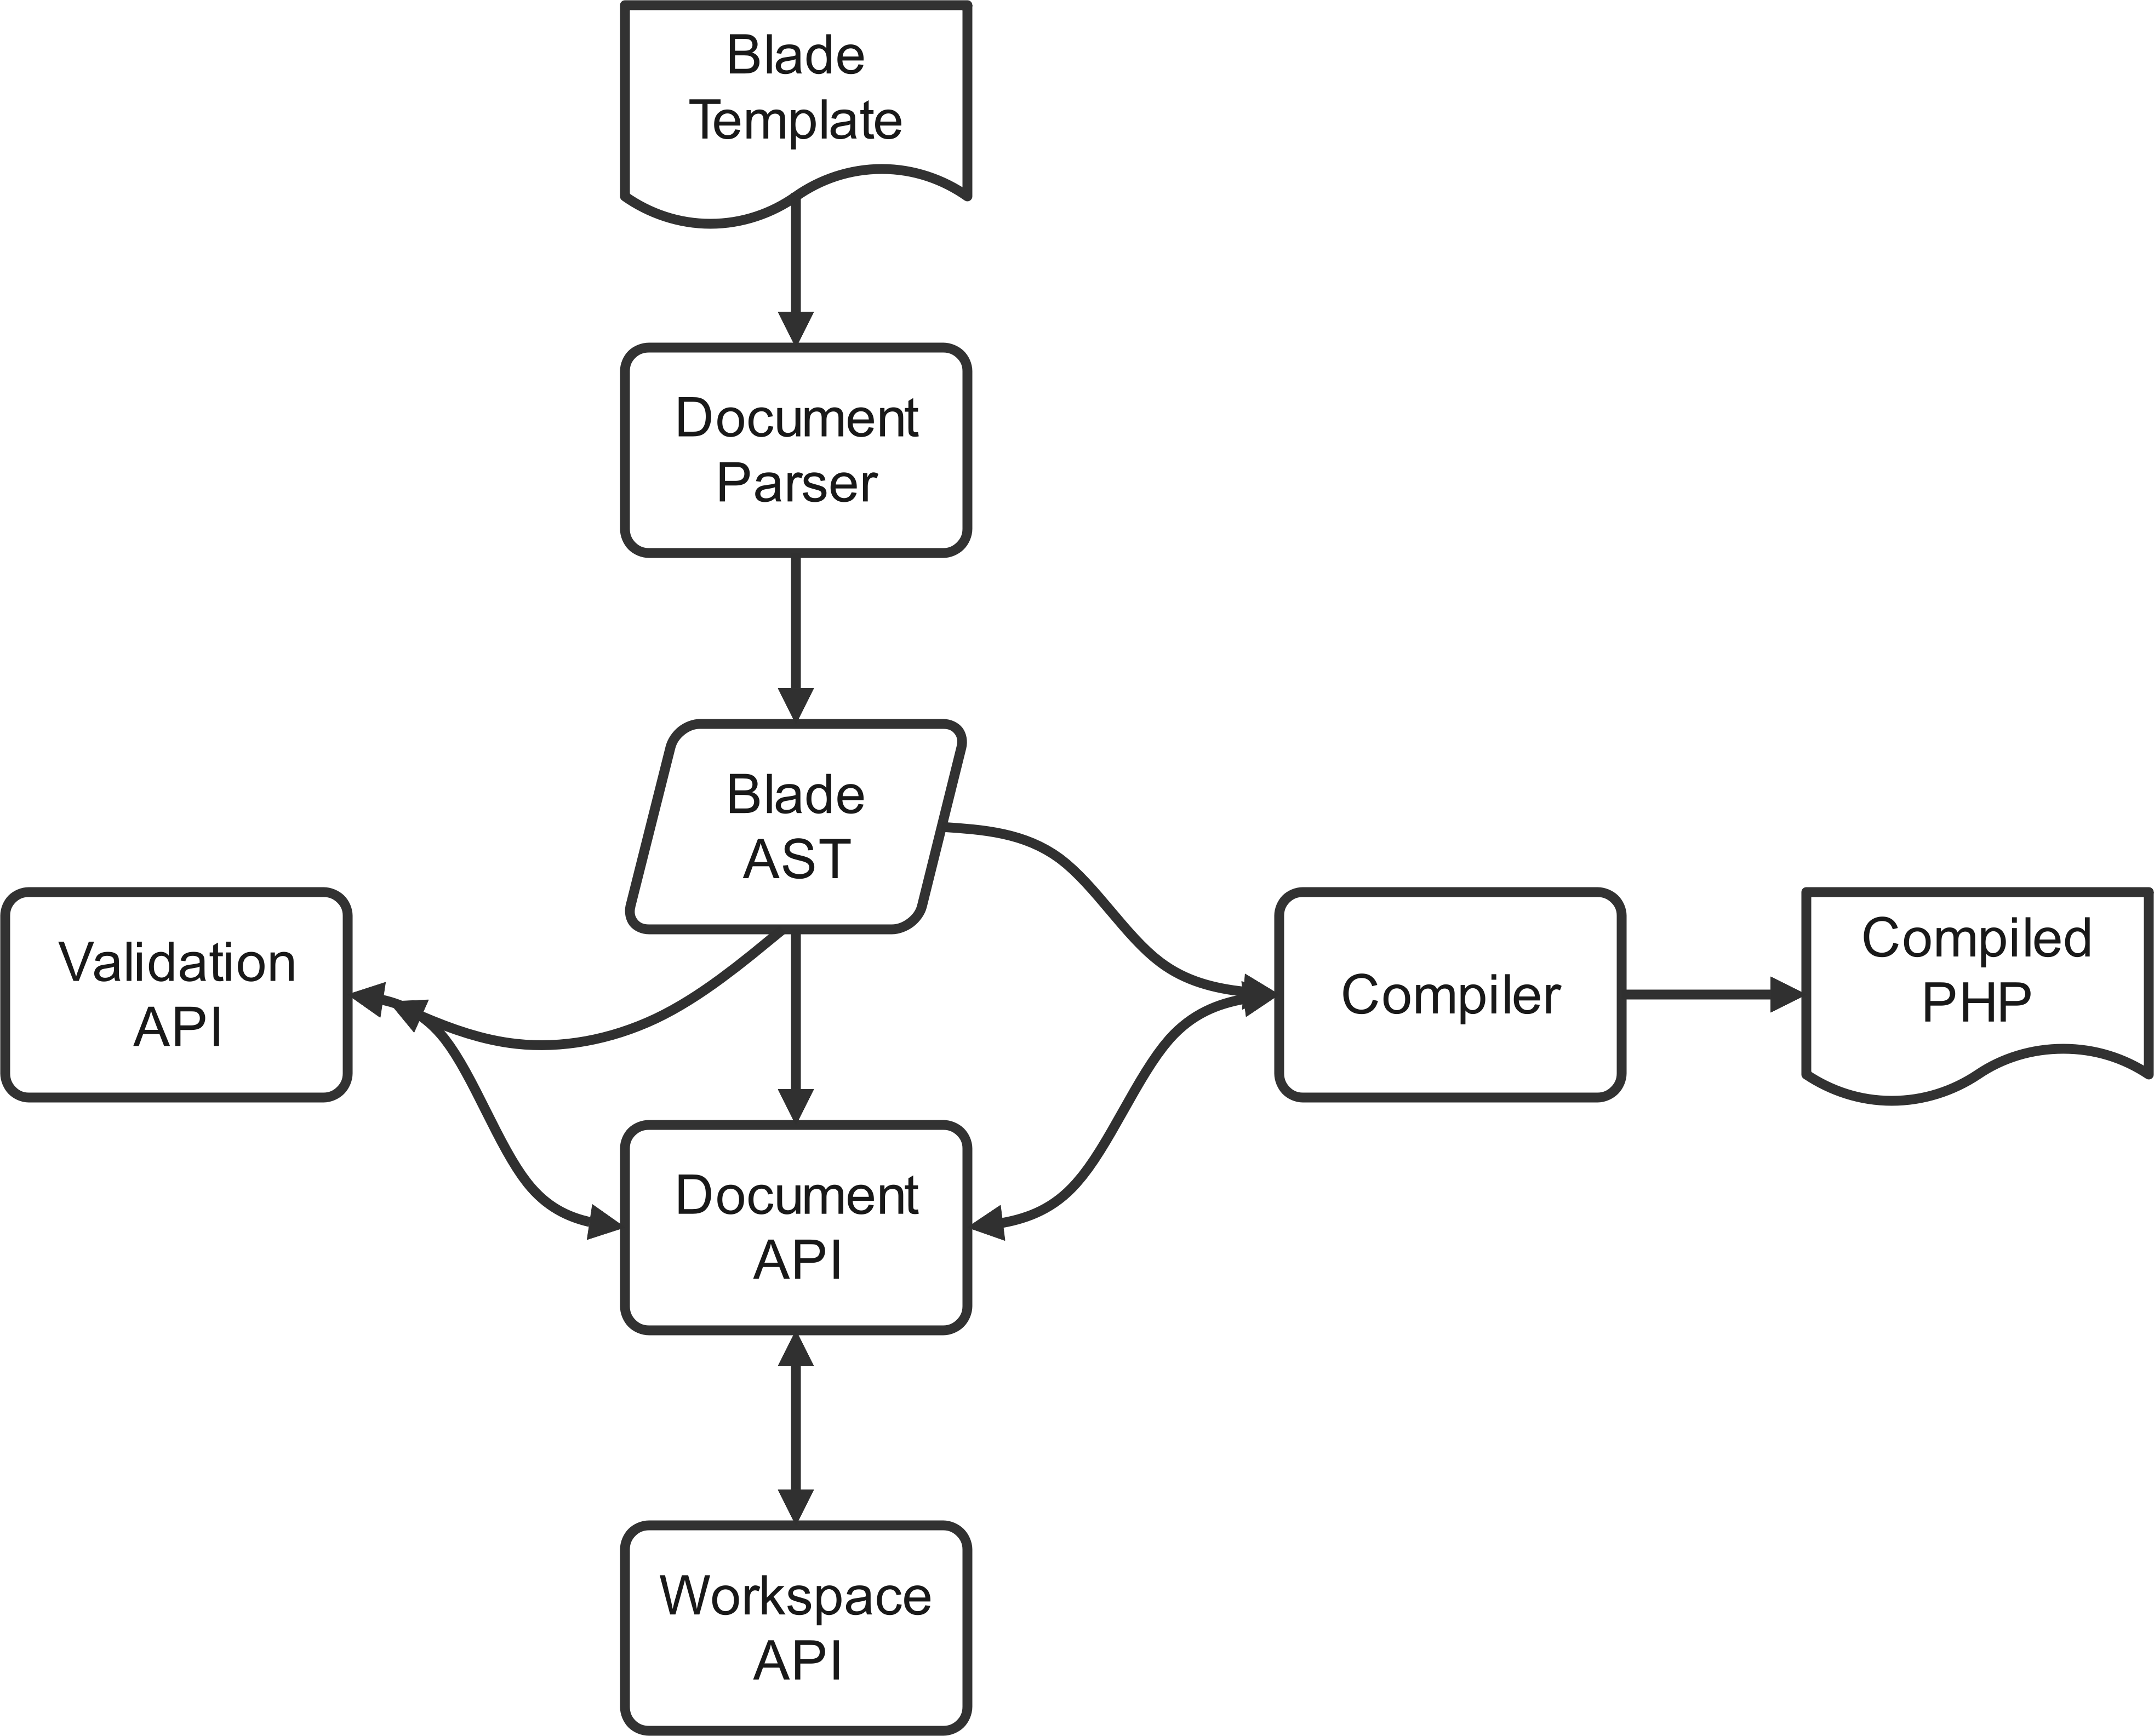 Diagram of Blade Parser's Processes and Architecture.